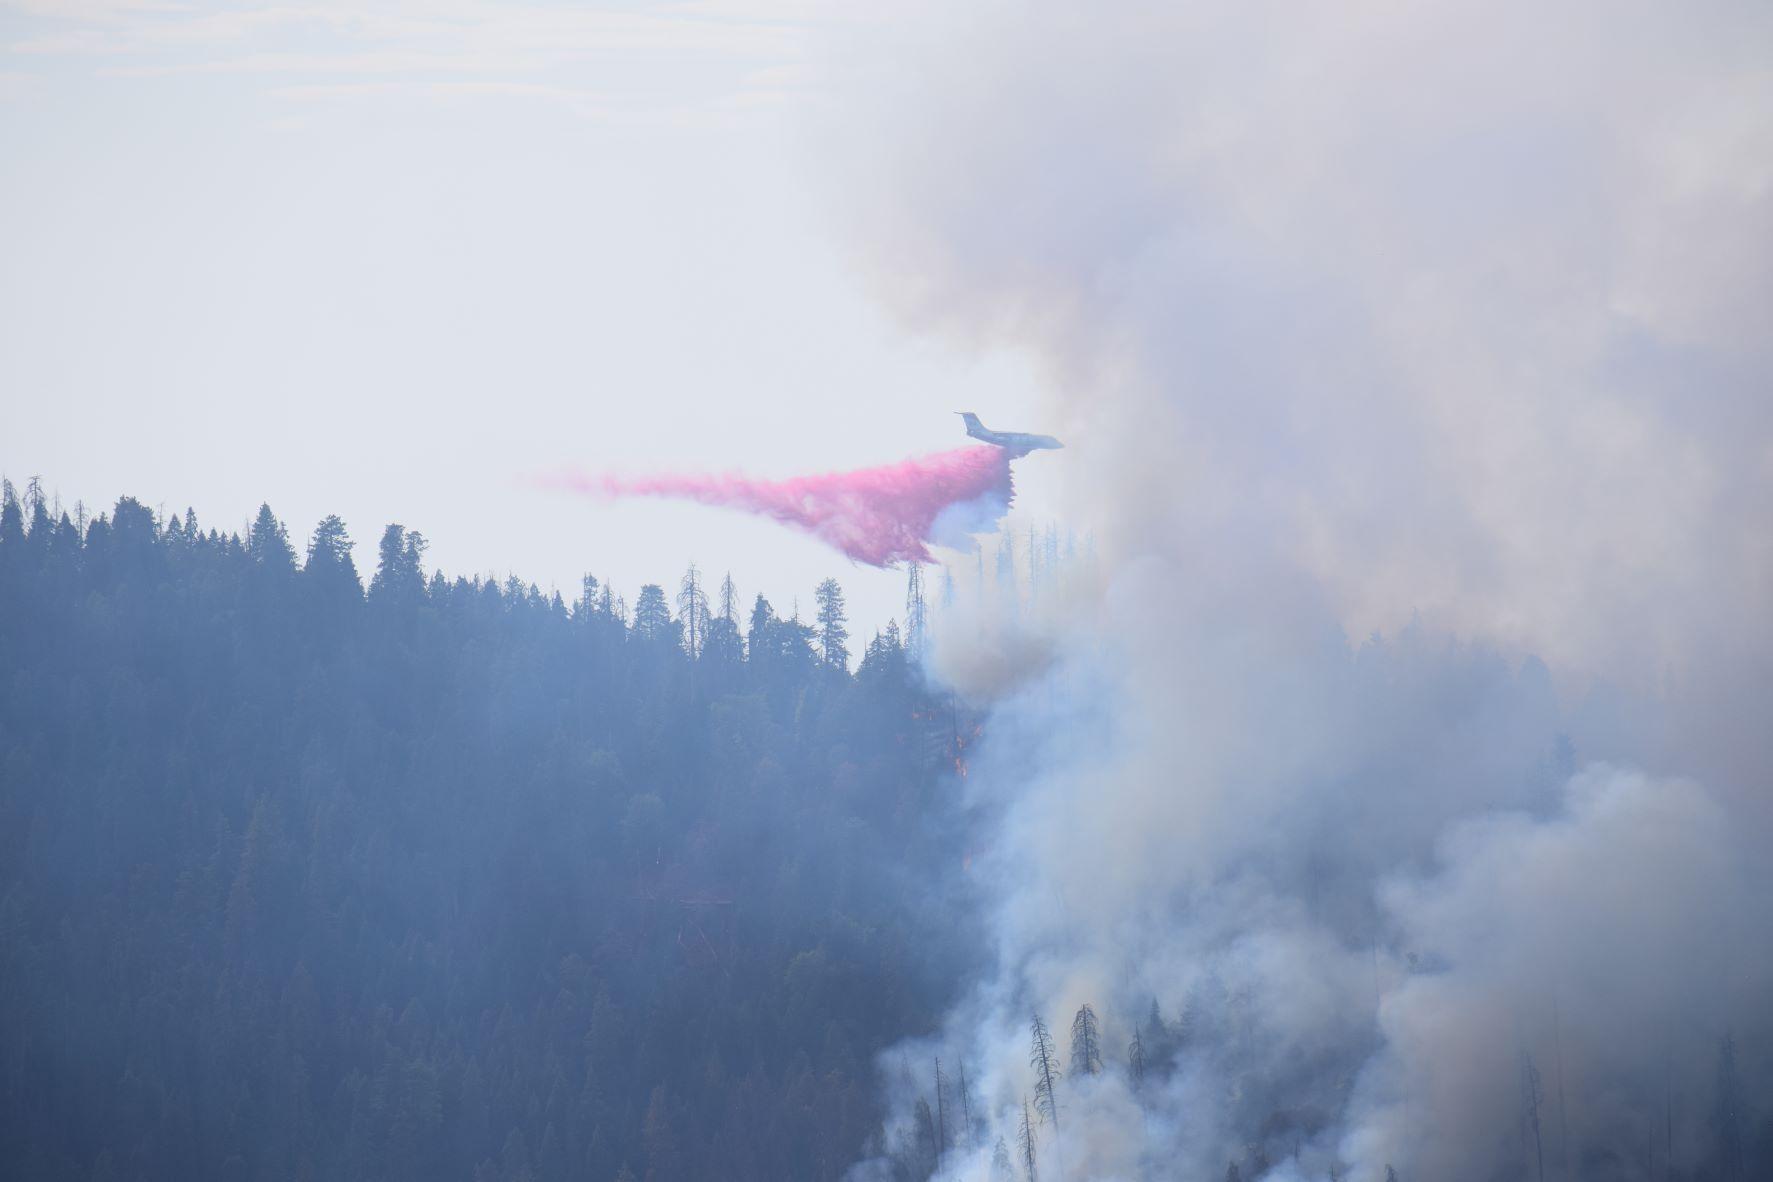 Aircraft dropping fire retardant on Colony Fire. Fire smoke and tree line visible below.